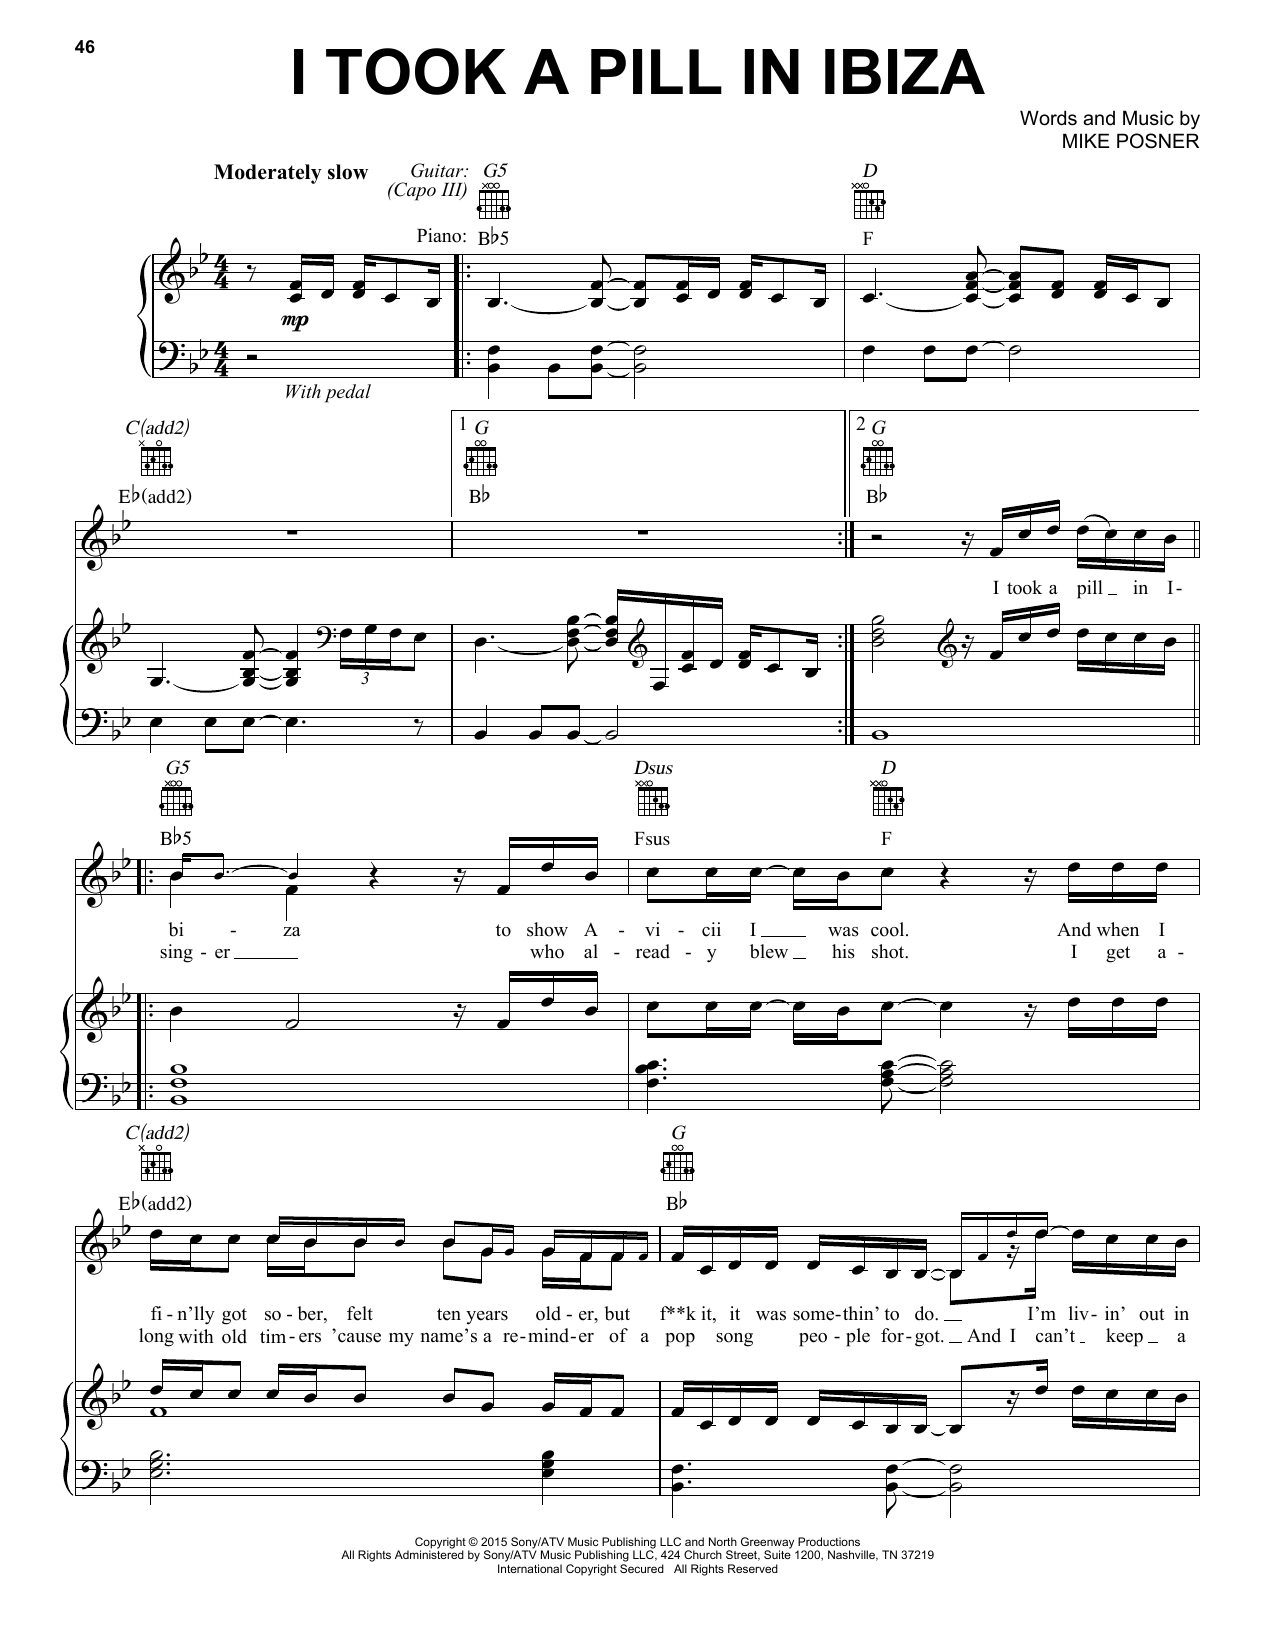 Mike Posner "I Took A Pill In Ibiza" Sheet Music Notes, Chords | Piano - Mike Posner I Took A Pill In Ibiza Letra